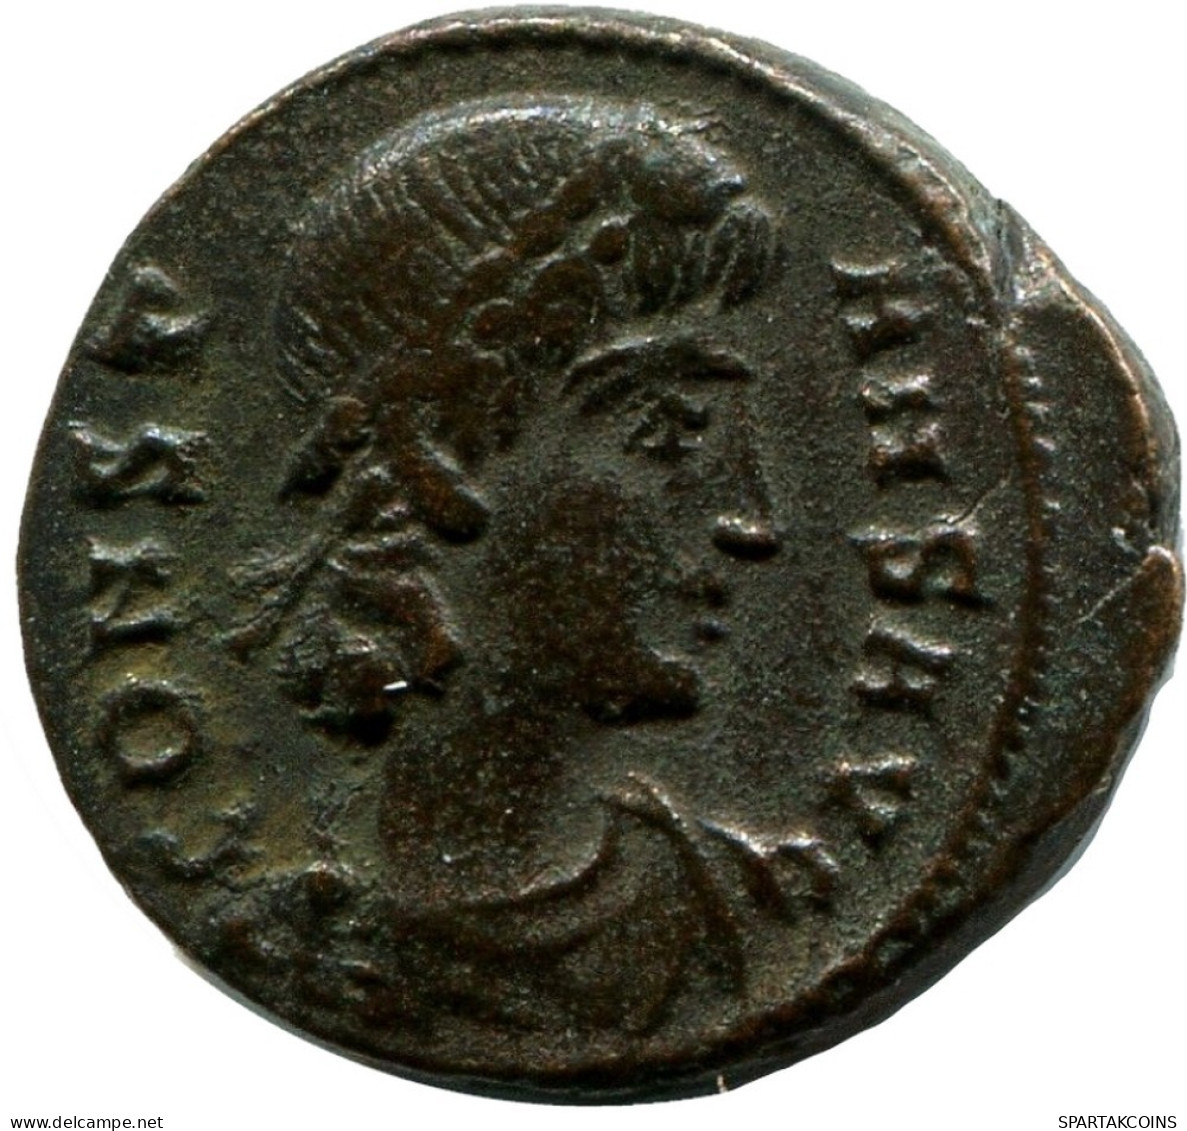 CONSTANS MINTED IN ALEKSANDRIA FOUND IN IHNASYAH HOARD EGYPT #ANC11320.14.D.A - The Christian Empire (307 AD Tot 363 AD)